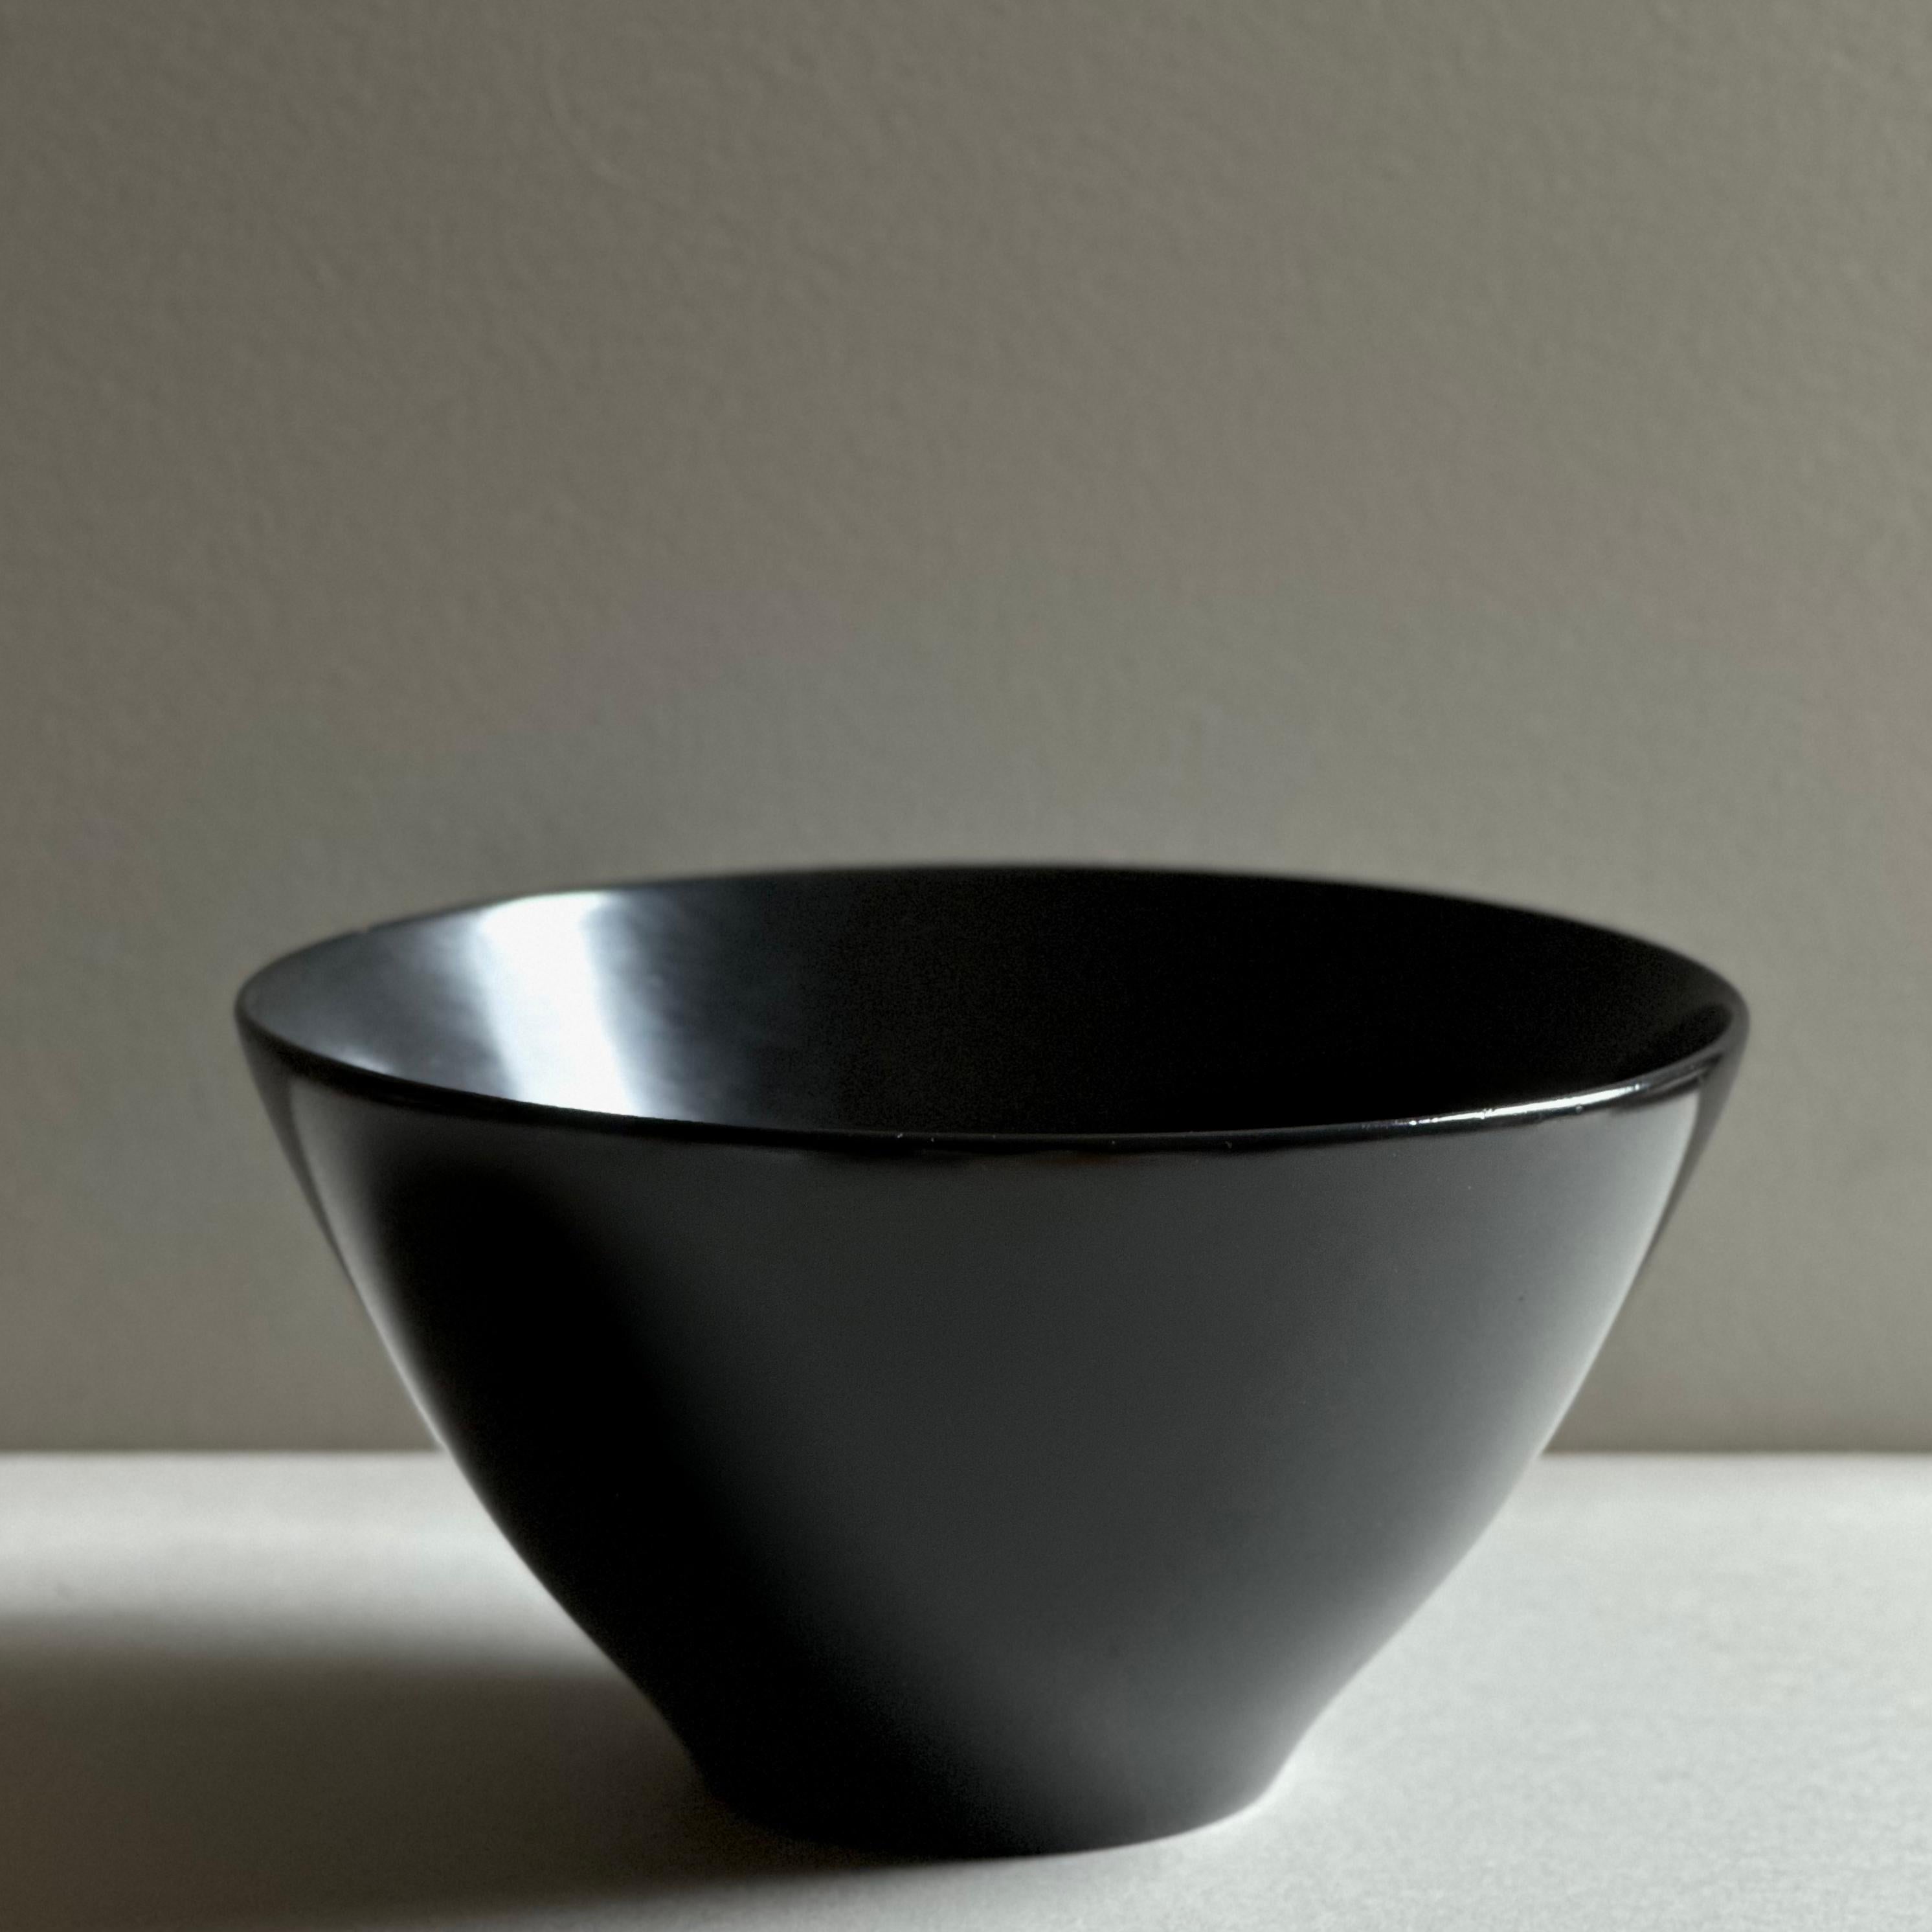 A modernist, turned mahogany bowl with a hand-rubbed satin black finish. Unsigned, circa 1970.